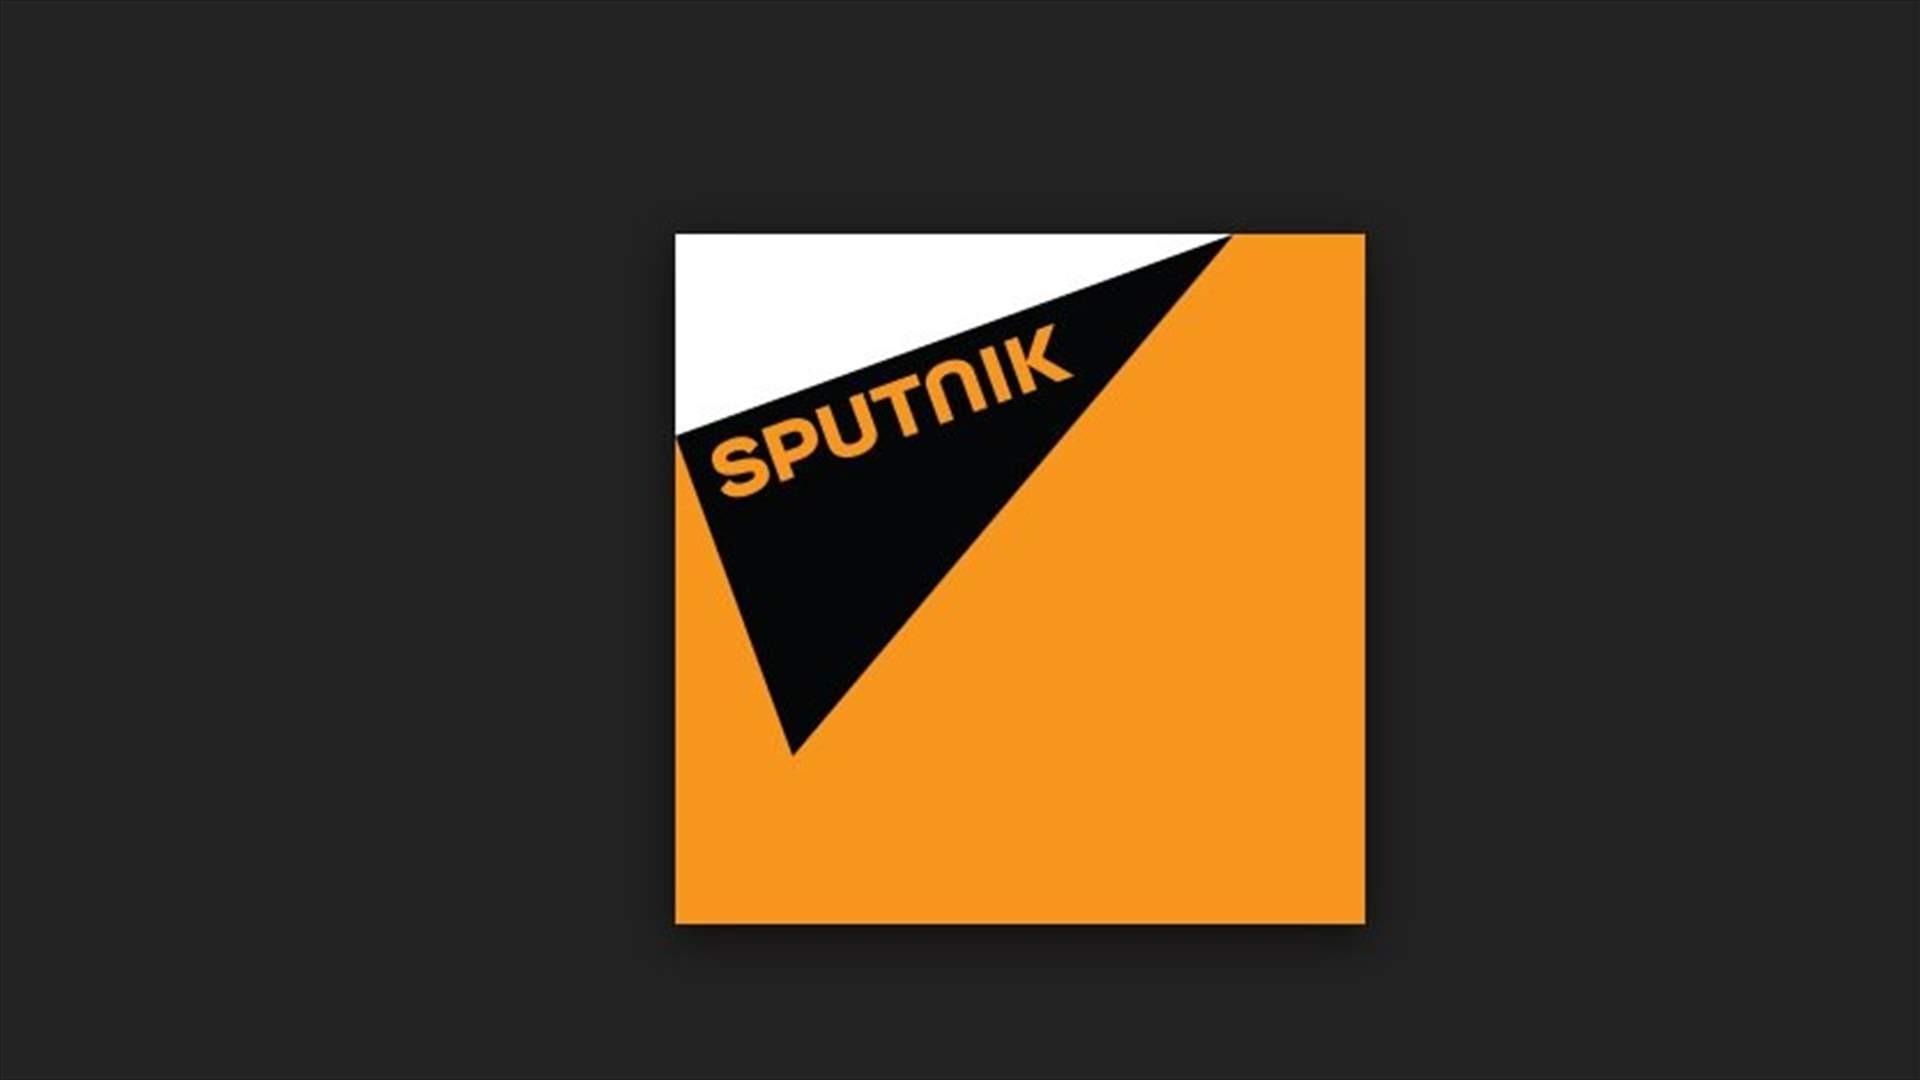 Russia&#39;s foreign ministry says Sputnik site blocking by Turkey unlawful - RIA